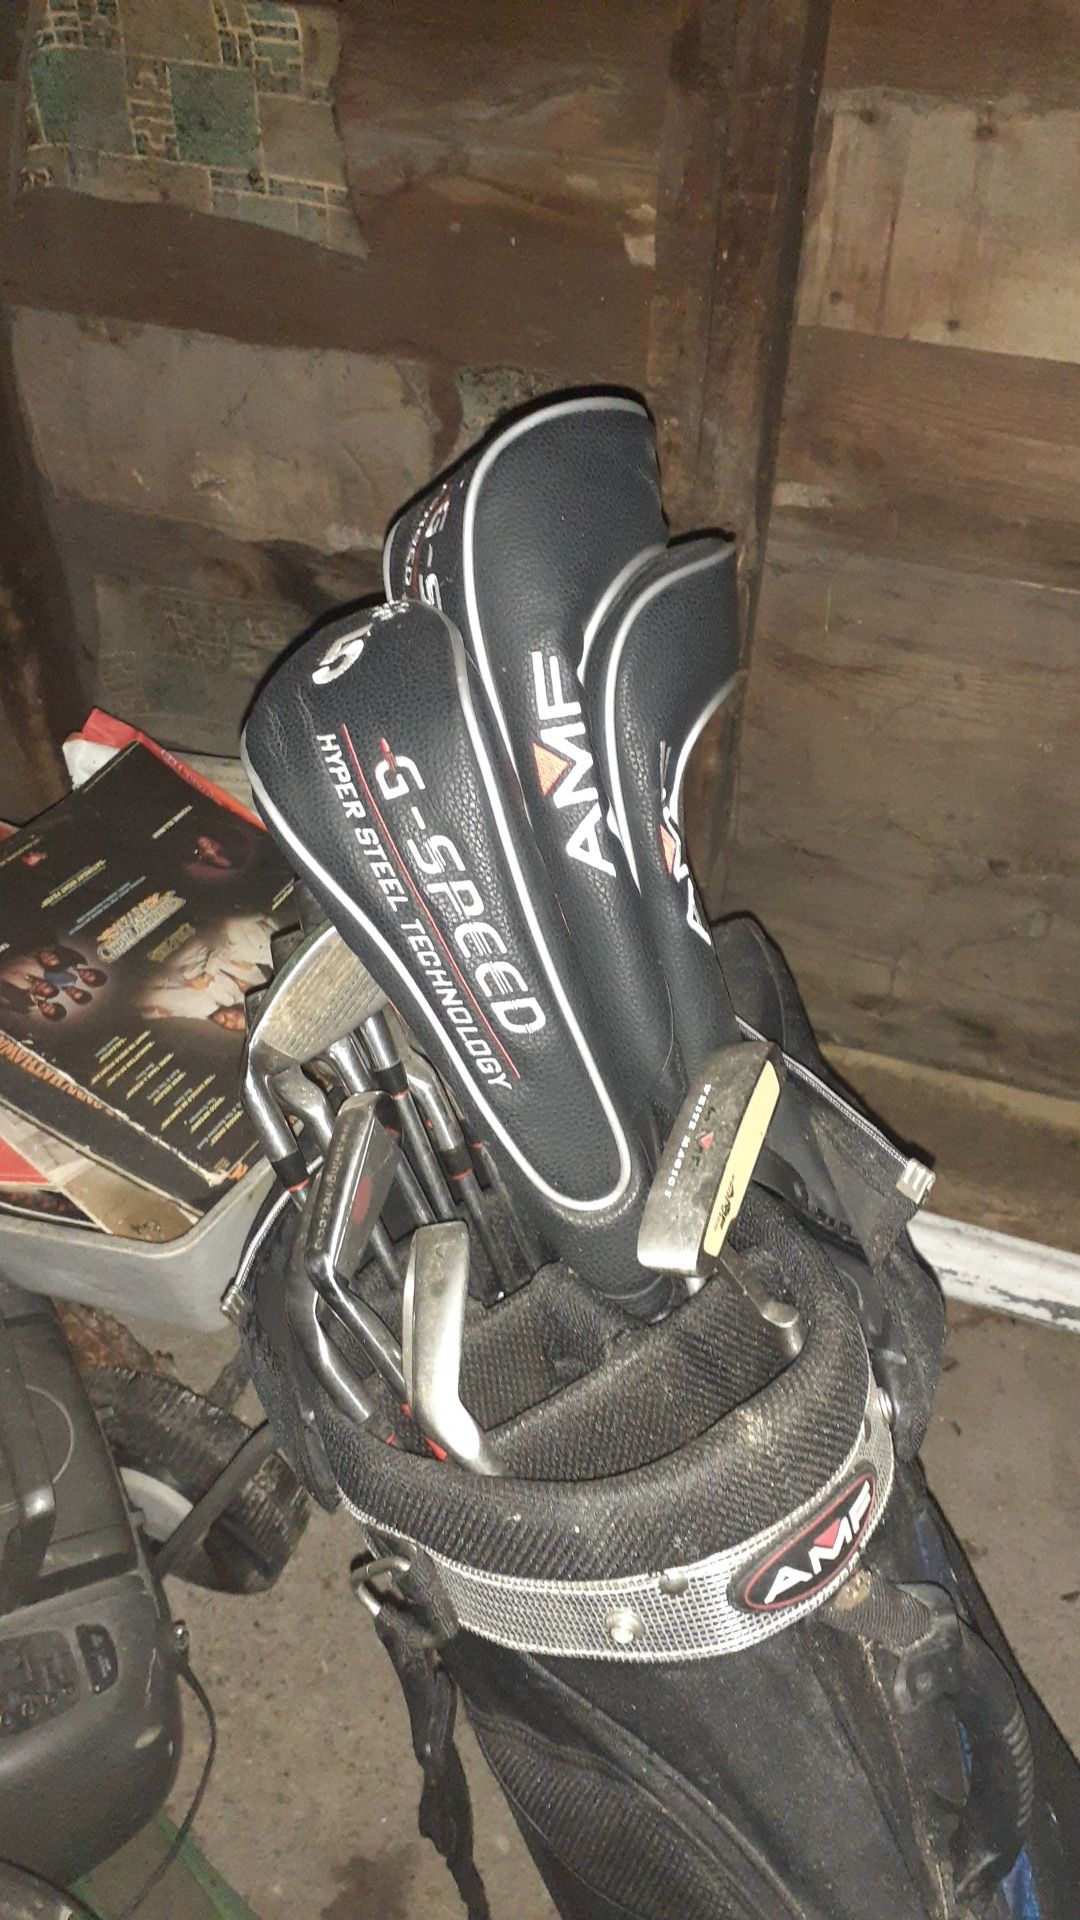 AMF Golf Clubs with every club plus 2 G-speed drivers. Hurt my back awhile ago, and haven't golfed since.